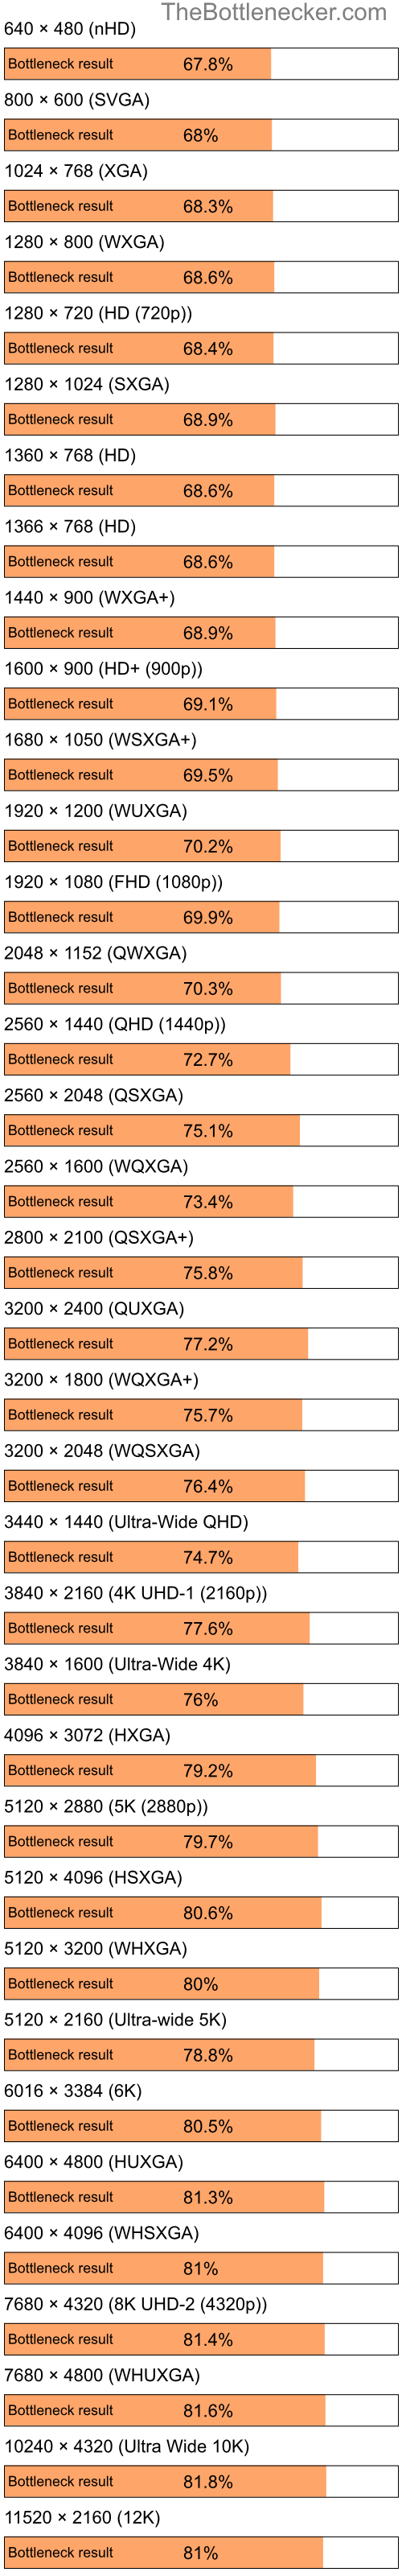 Bottleneck results by resolution for Intel Celeron and AMD Mobility Radeon HD 4250 in Graphic Card Intense Tasks